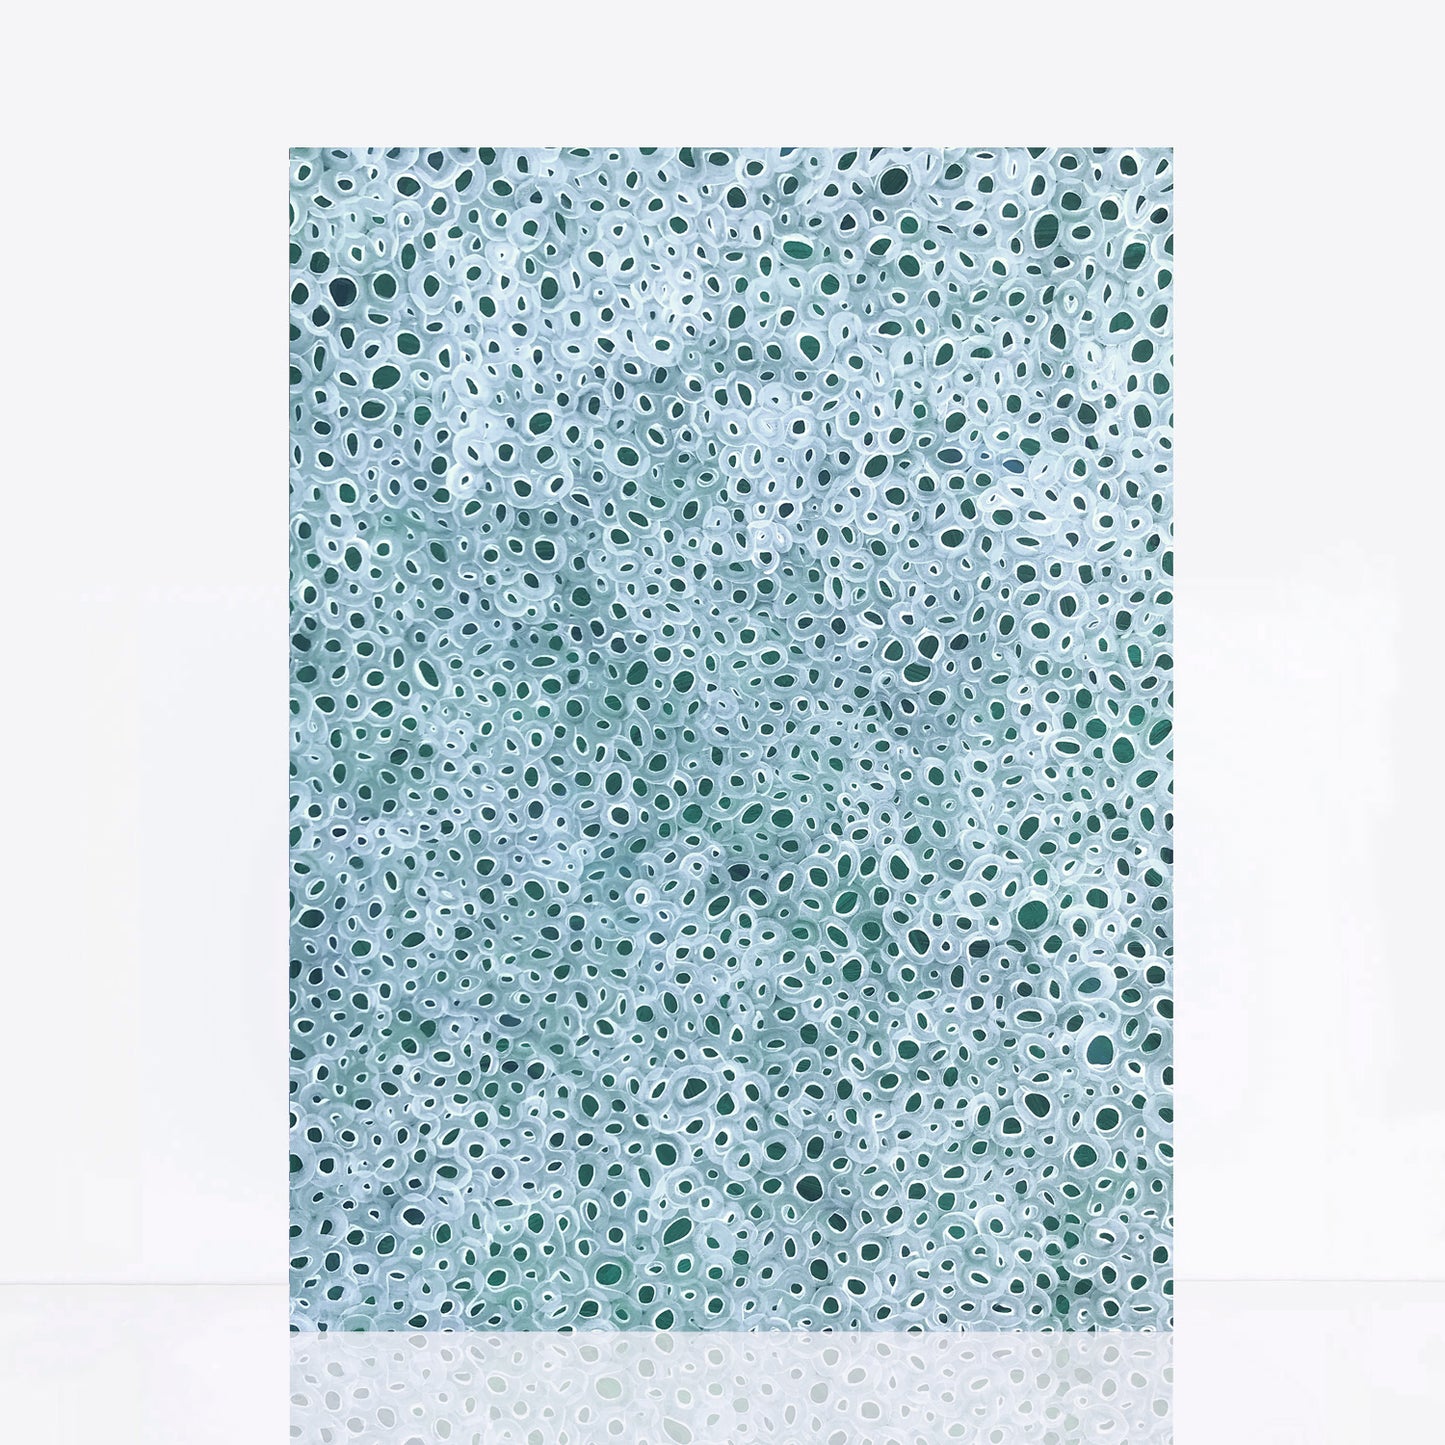 Australian abstract painting green with white infinity symbols 